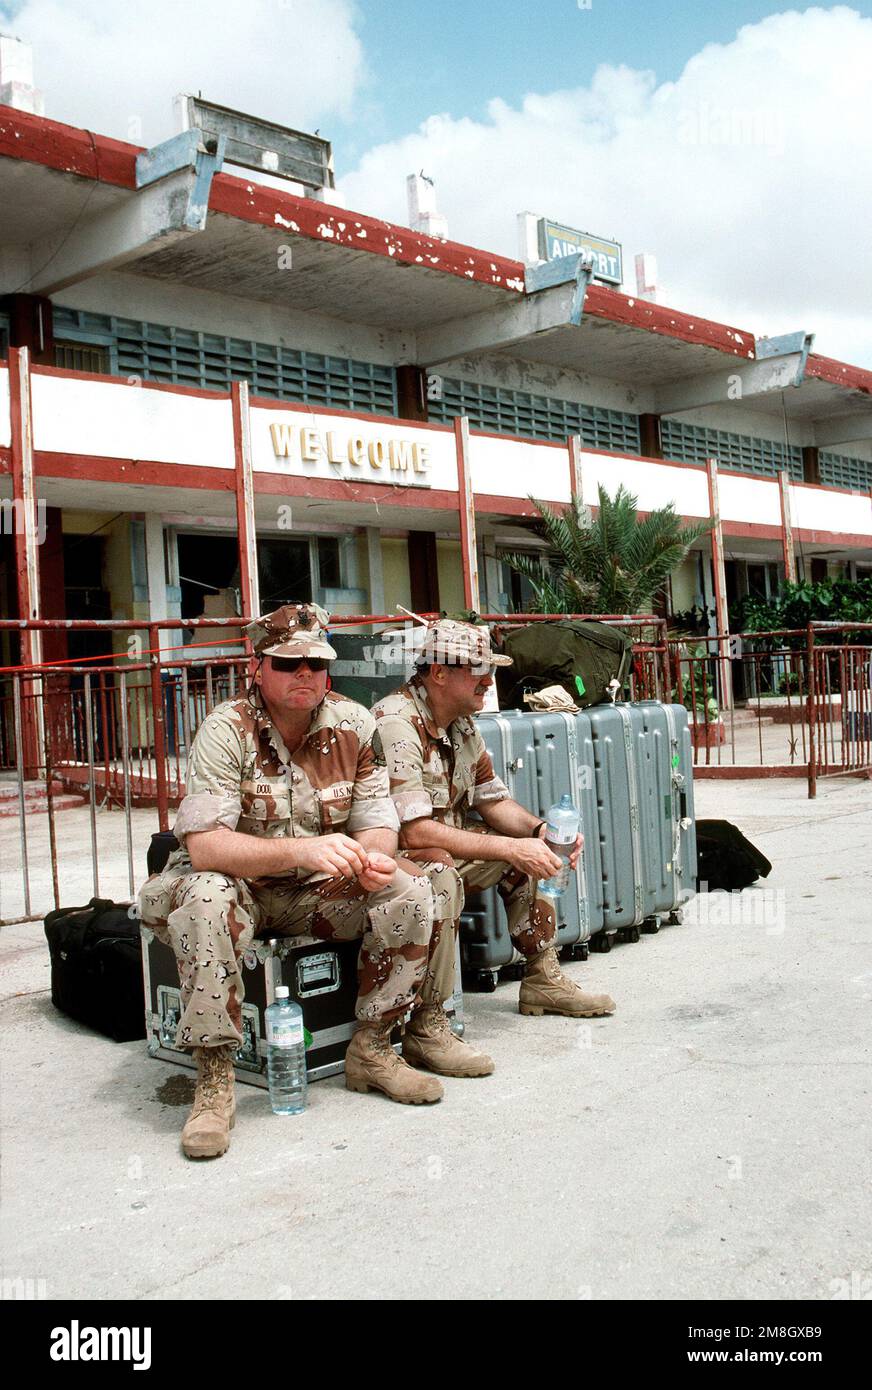 Photographer's Mate 2nd Class Dennis Dodd, left, and CHIEF Warrant Officer 4 Clyde Dunn, members of the Navy Broadcasting Service (NBS), wait for transportation in front of a terminal building at the Mogadishu International Airport during the multinational relief effort Operation Restore Hope. Subject Operation/Series: RESTORE HOPE Base: Mogadishu Country: Somalia (SOM) Stock Photo